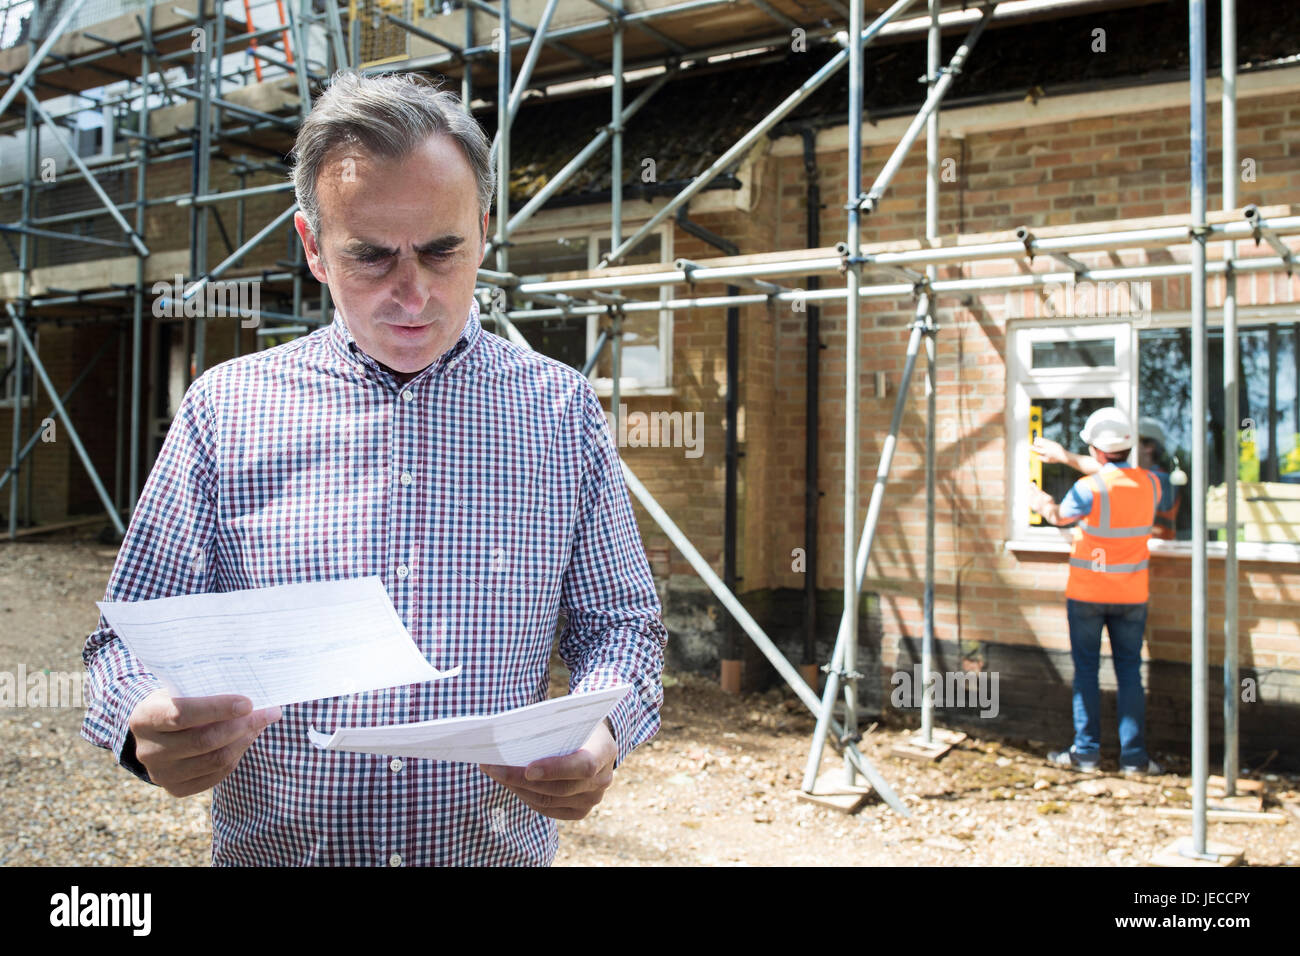 Worried Client Looking At Bills For House Building Work Stock Photo